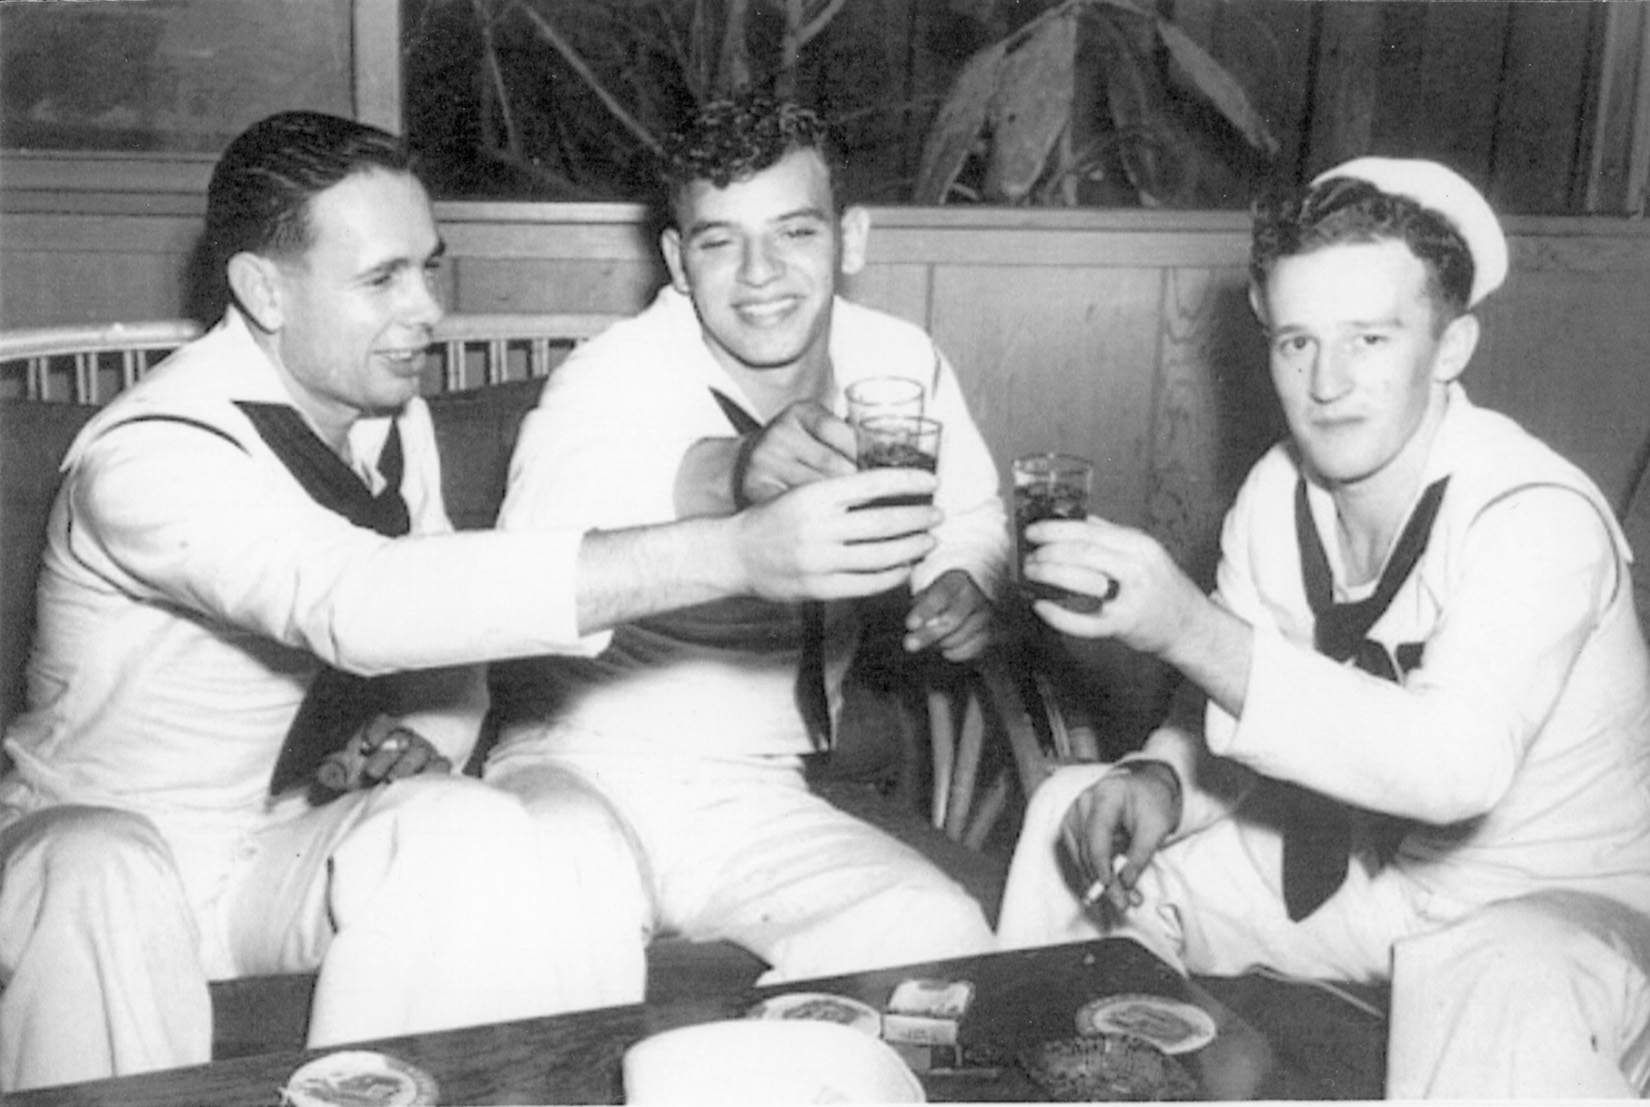 Seaman Clifford Olds (right) enjoys the company of two buddies on the evening of Dec. 6, 1941. Six hours later, he was trapped in pump room A-109 aboard the USS West Virginia fighting for his life.